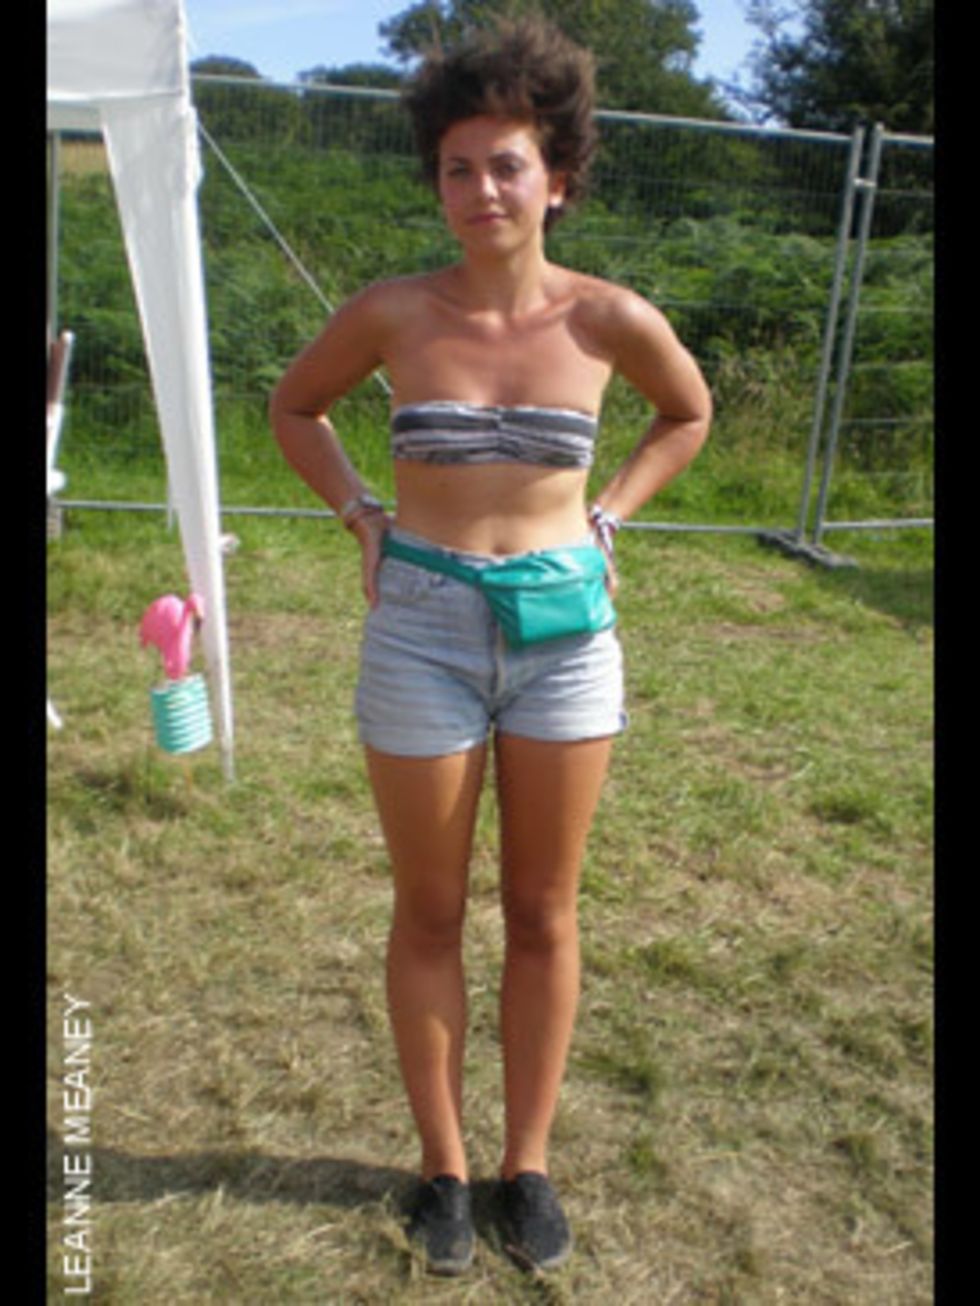 <p>Nina, 23, Fashion Designer, Wearing a bandeaux and Bumbag from American apparel and vintage shorts.</p>